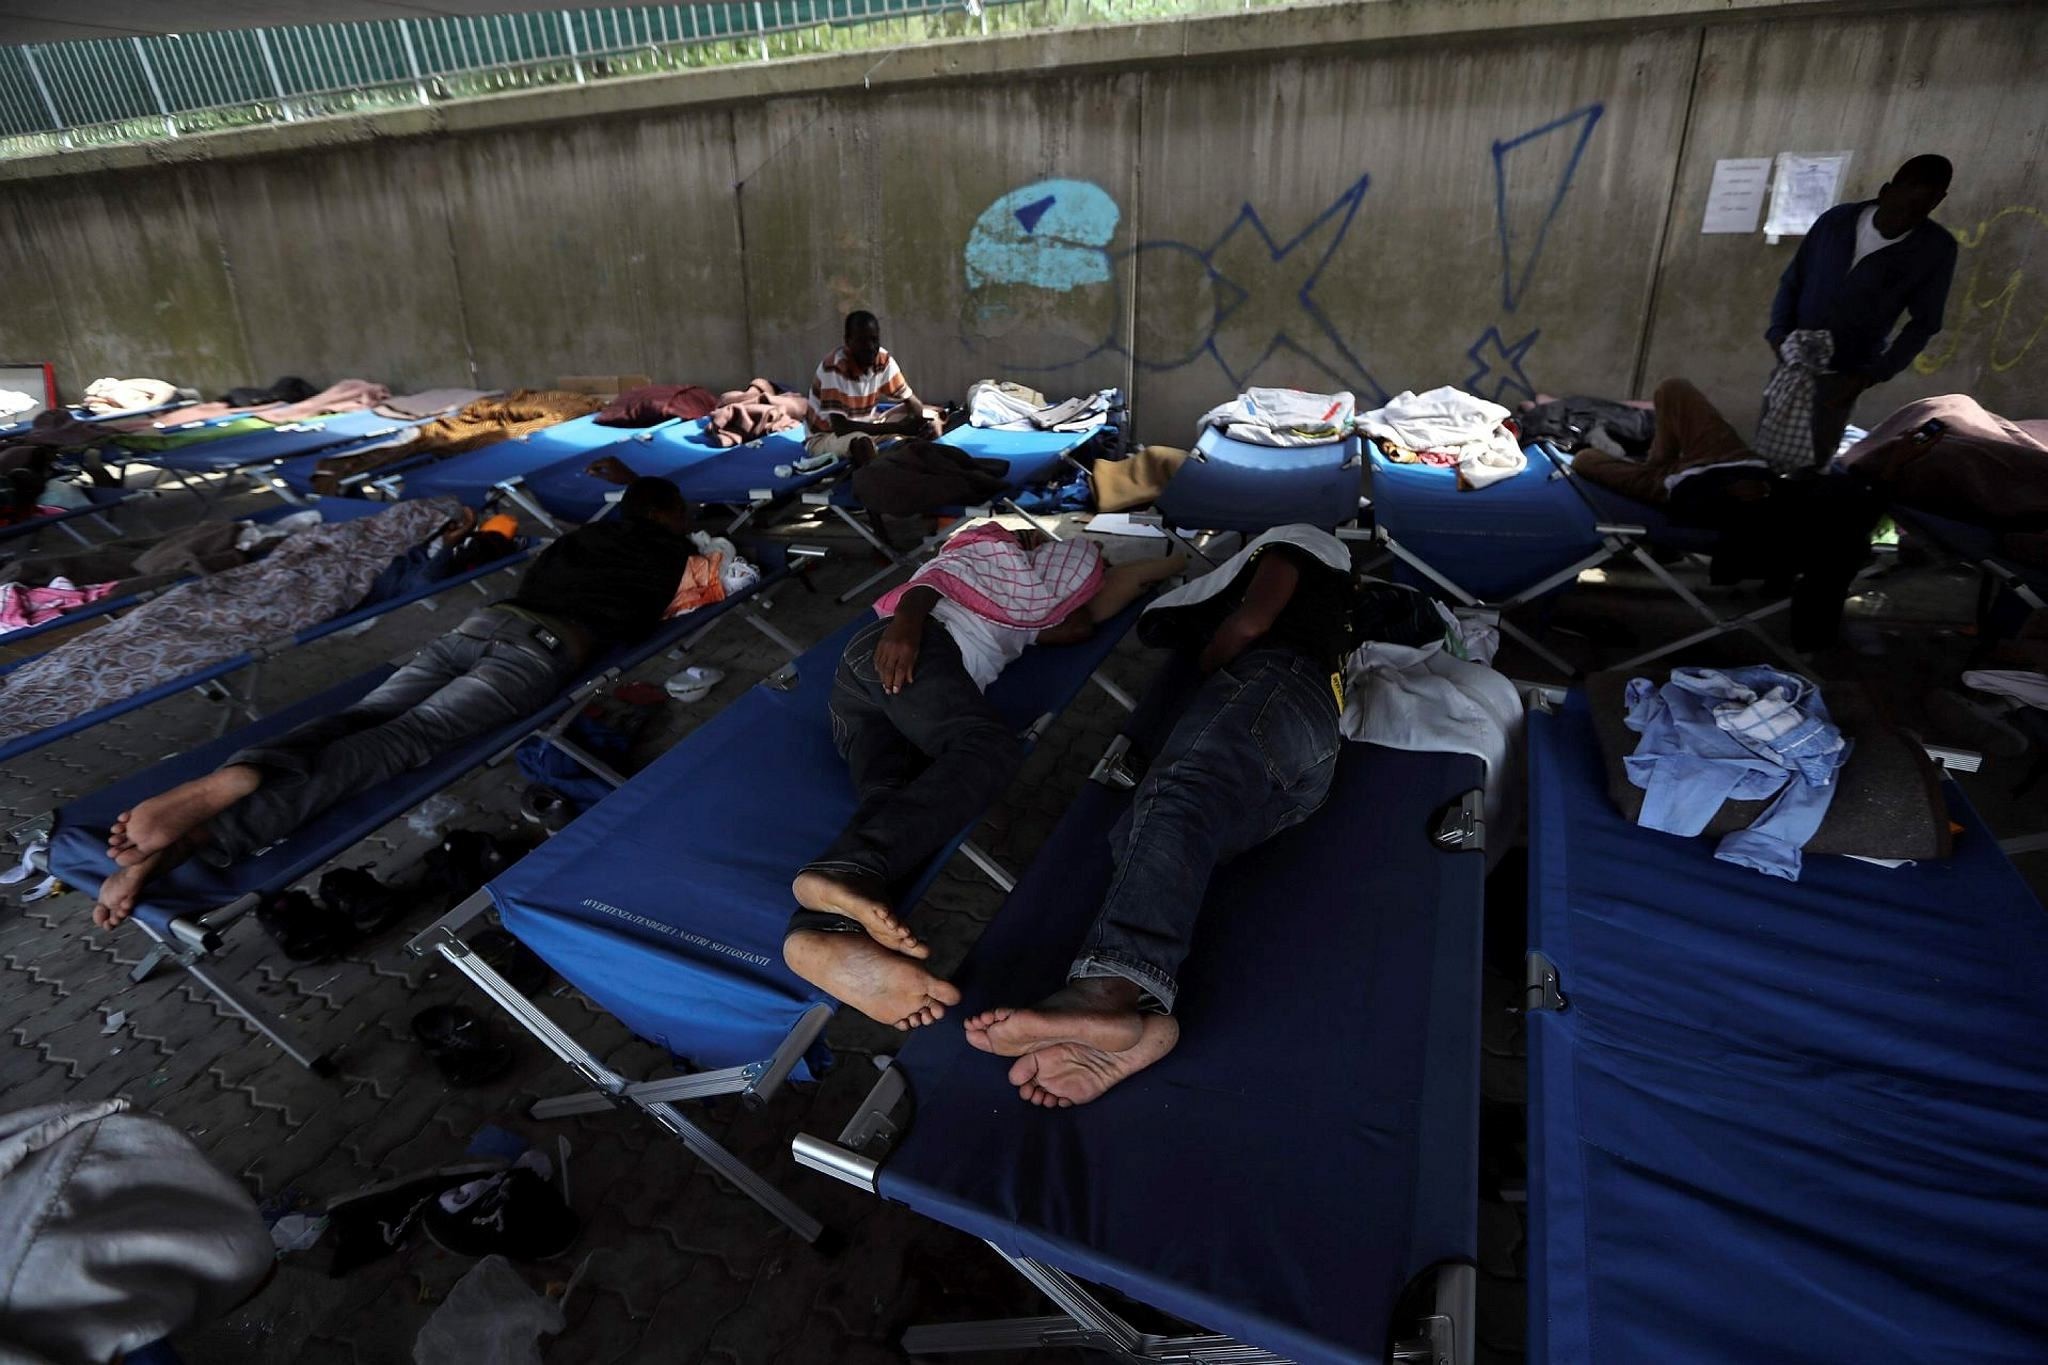 Migrants sleep on camp beds at a Red Cross center in the city of Ventimiglia on the French-Italian border on Sept. 14.